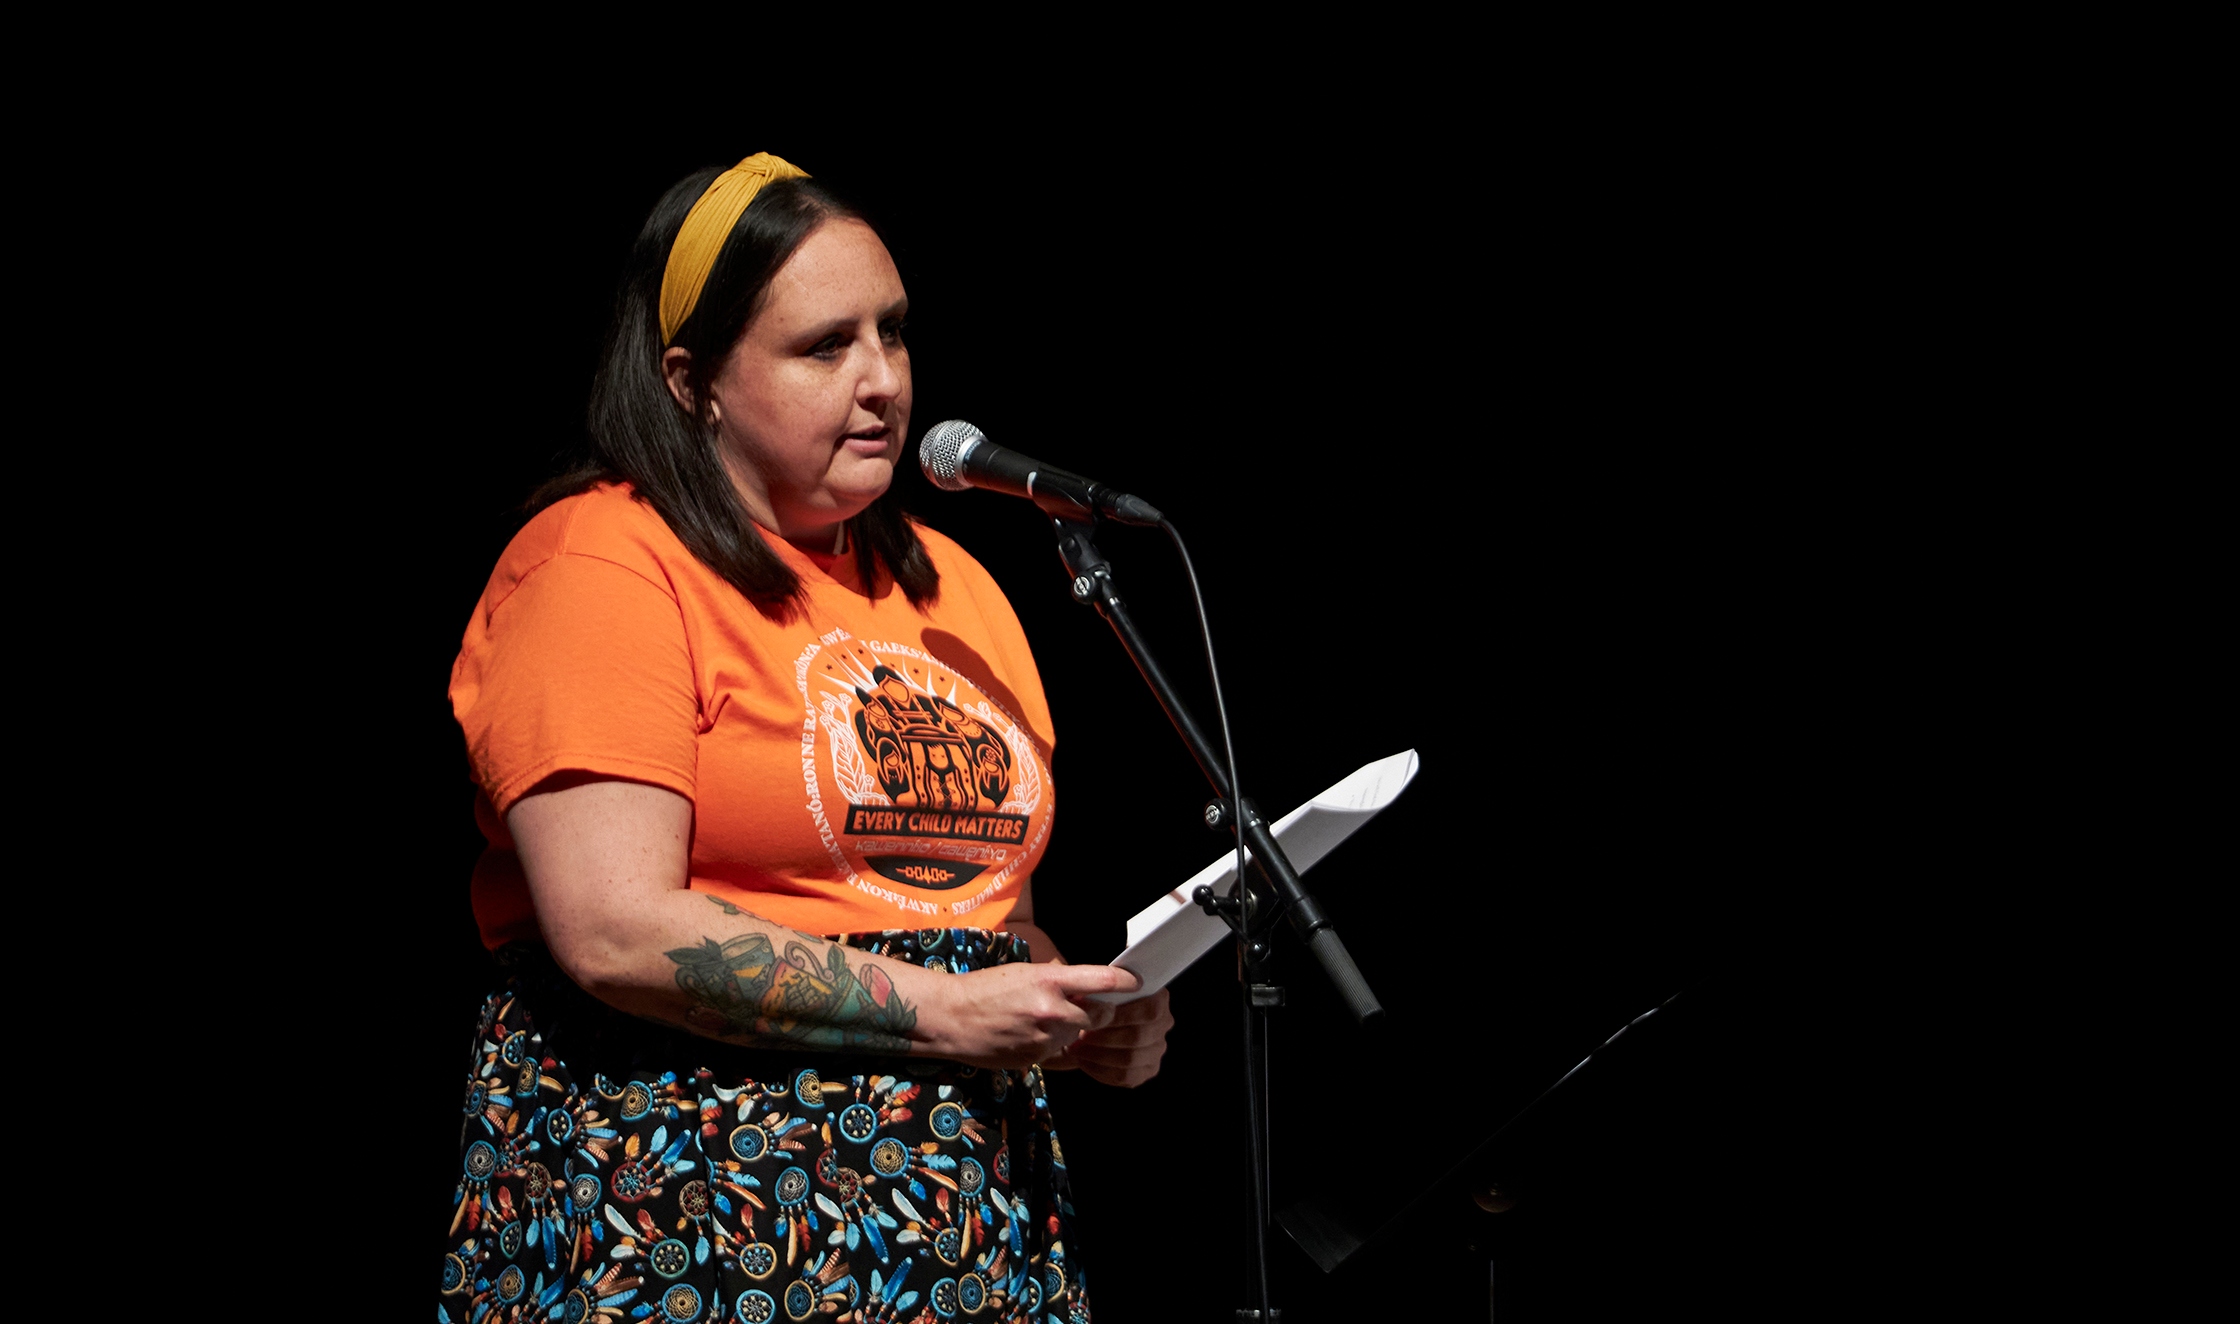 Chrissy Doolittle speaking at a mic